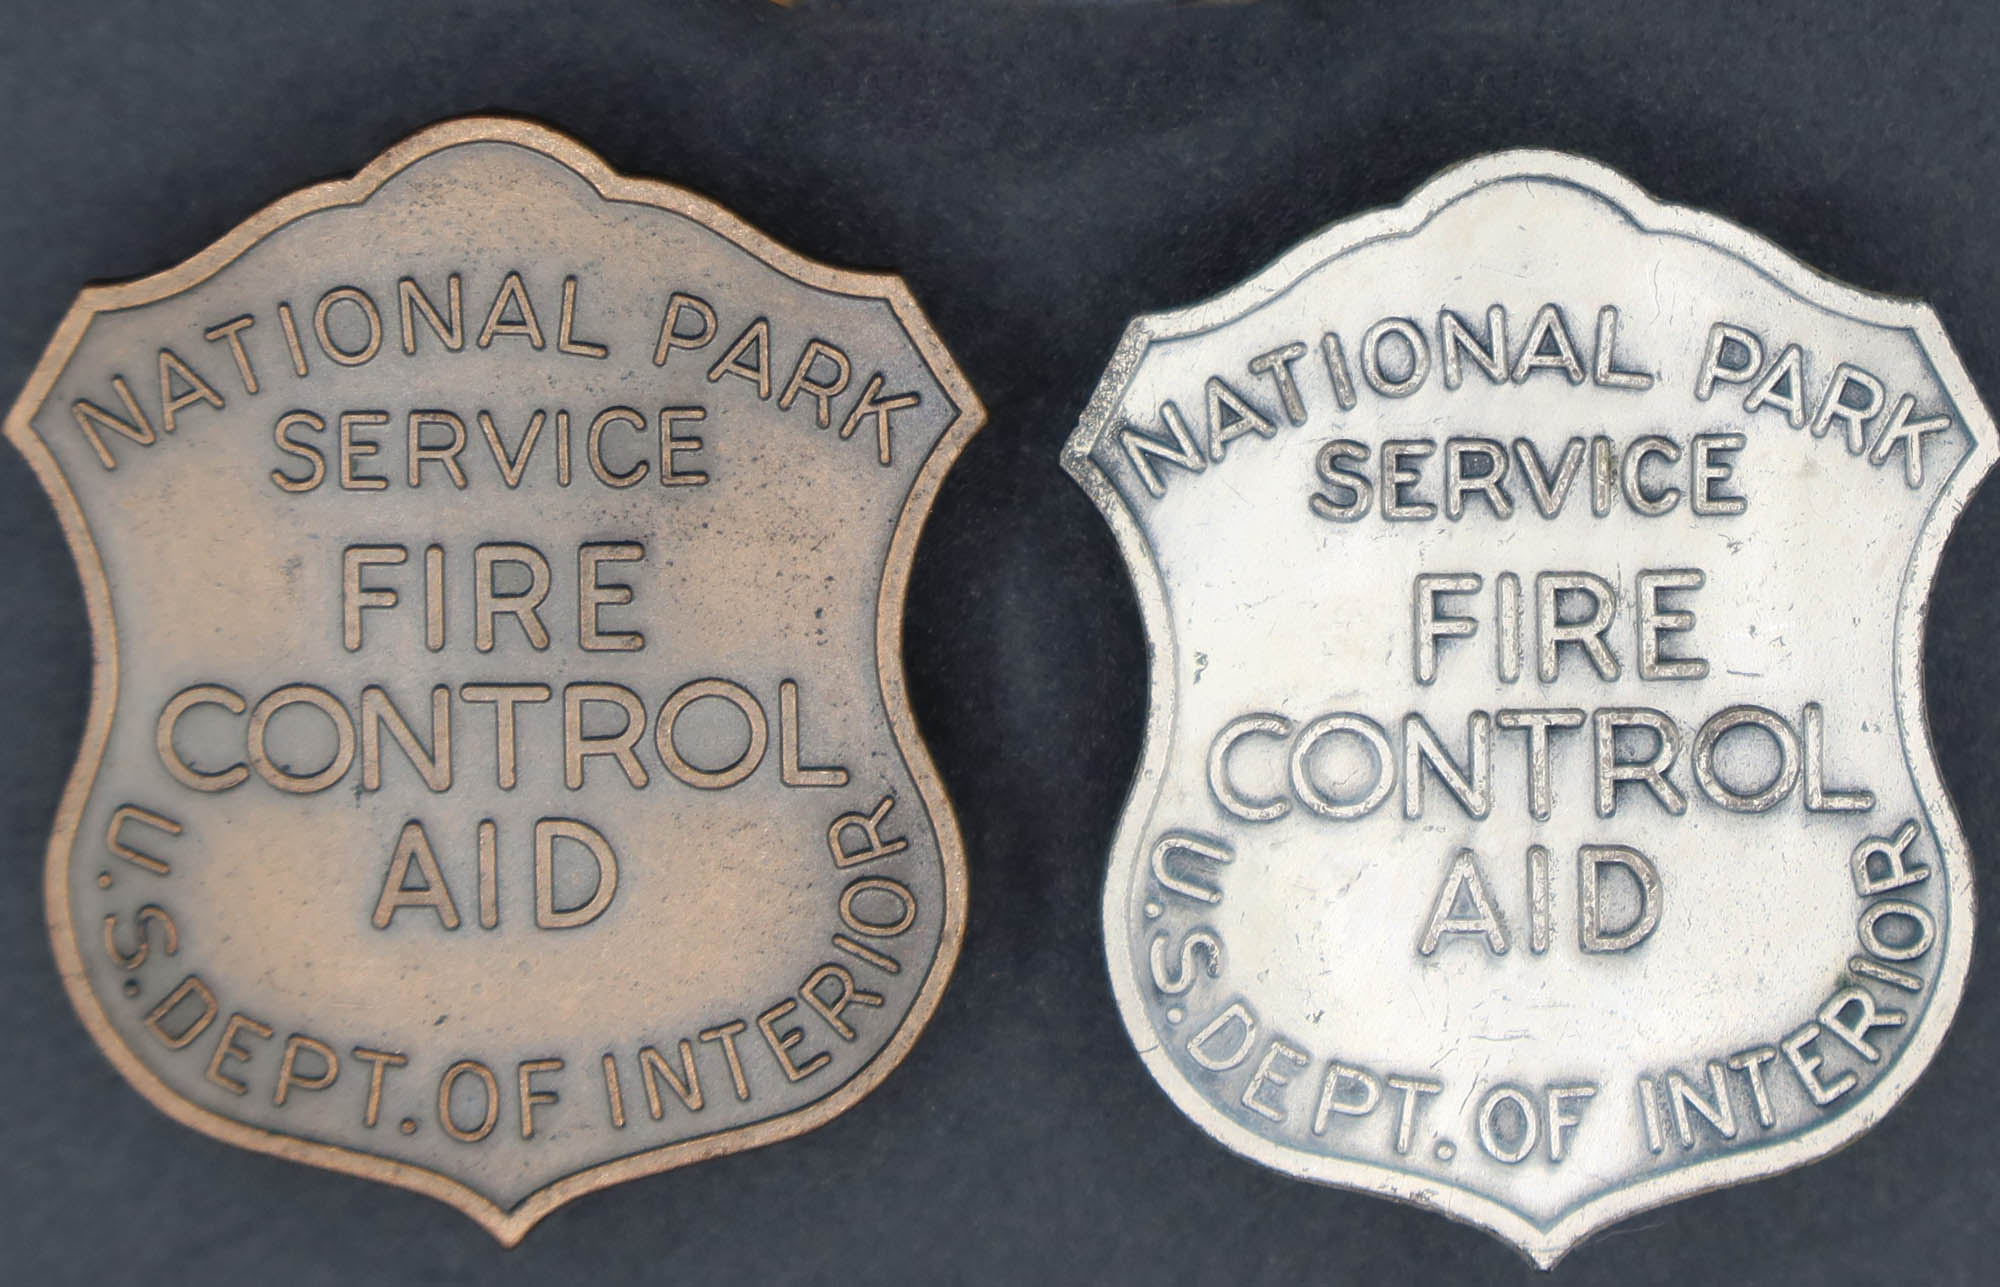 Shield-shaped badges marked, National Park Service and US Depart of Interior. One marked Fire Guard and 179. Two marked Fire Control Aid.